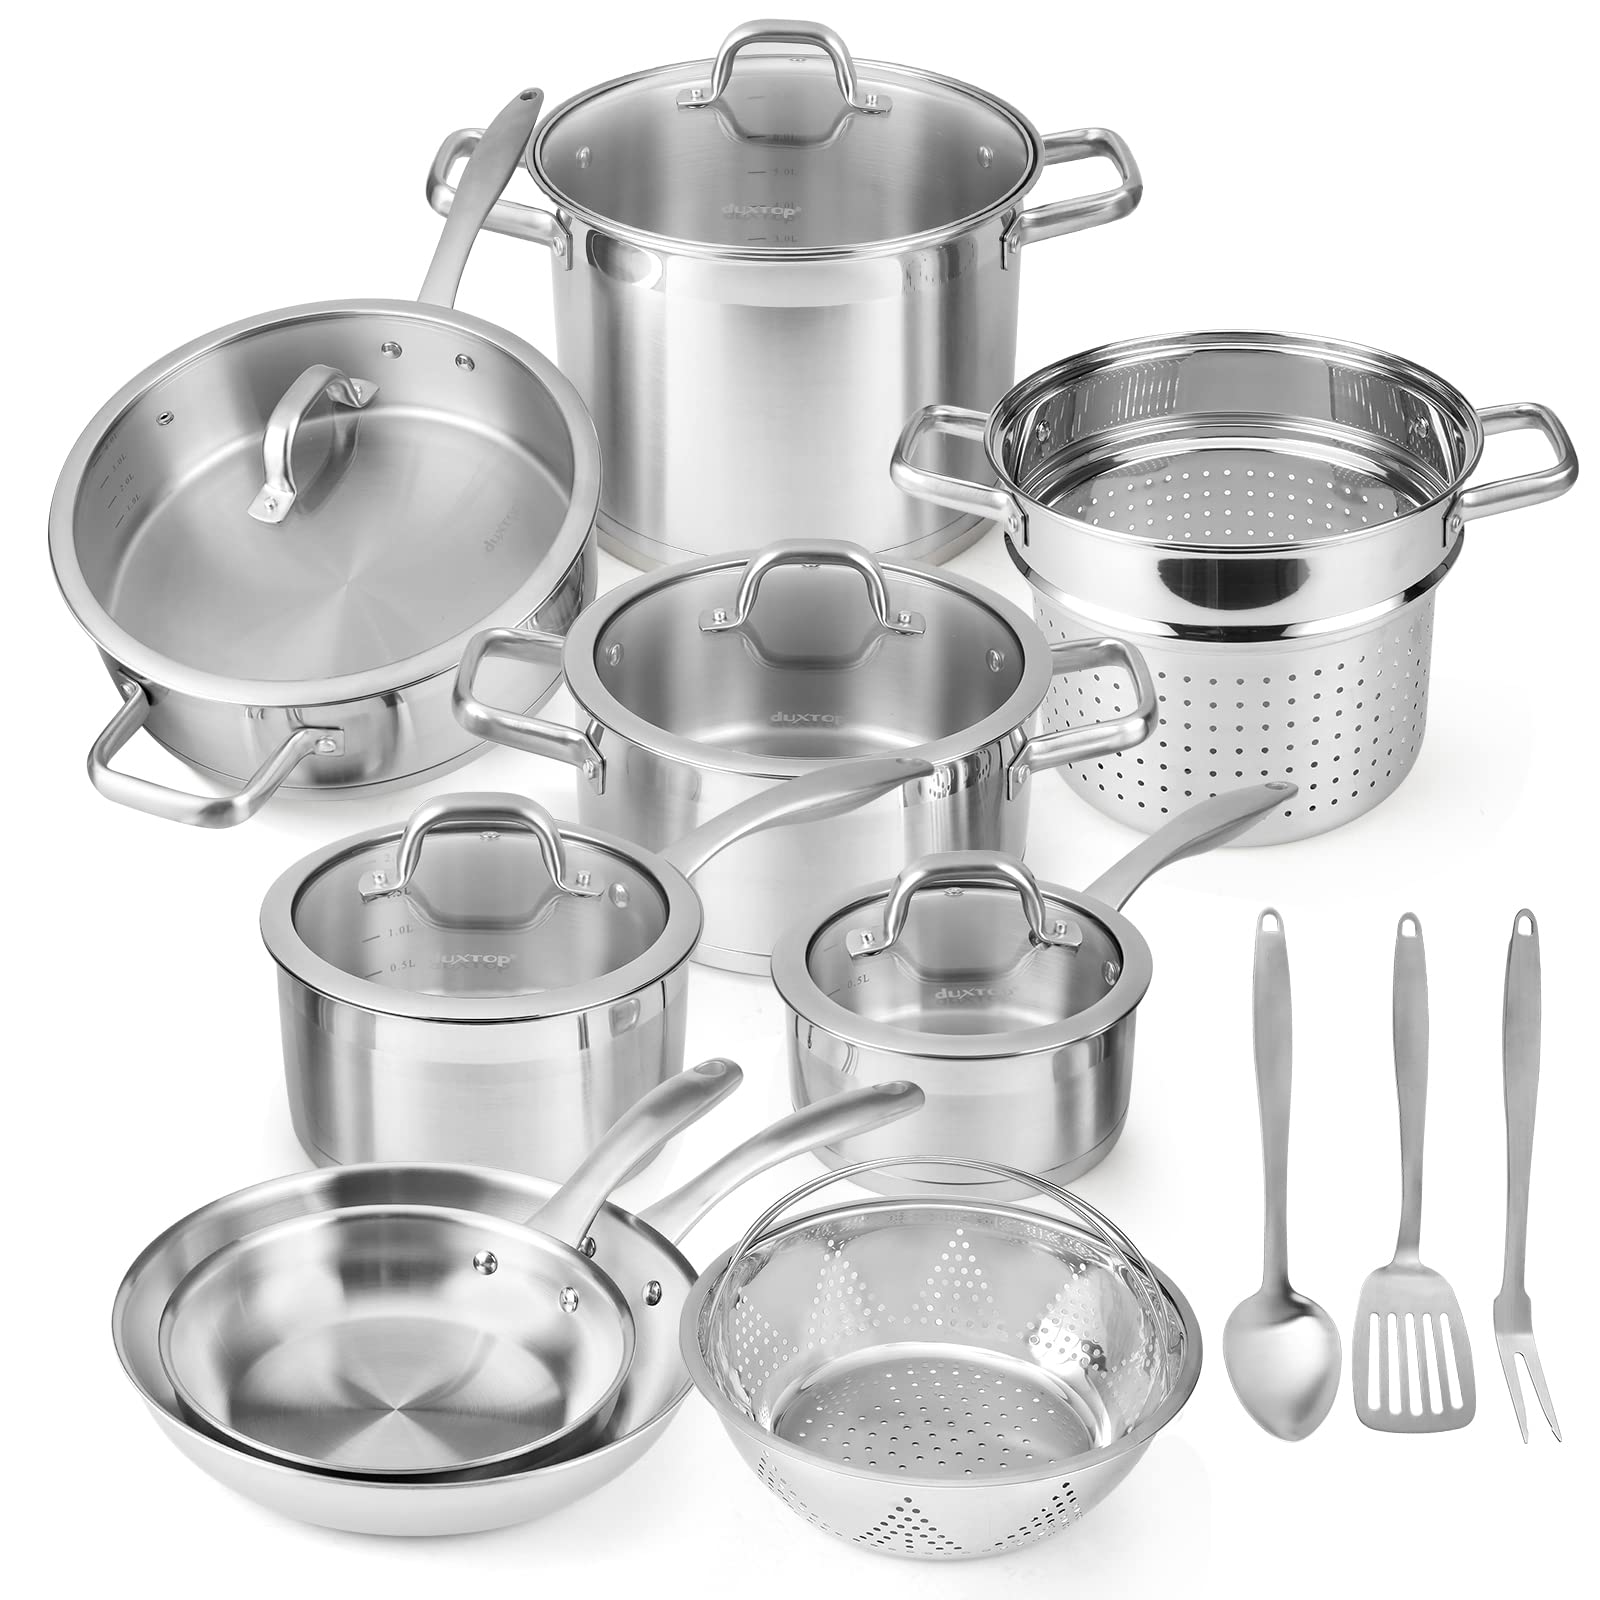 duxtop-professional-stainless-steel-pots-and-pans-set